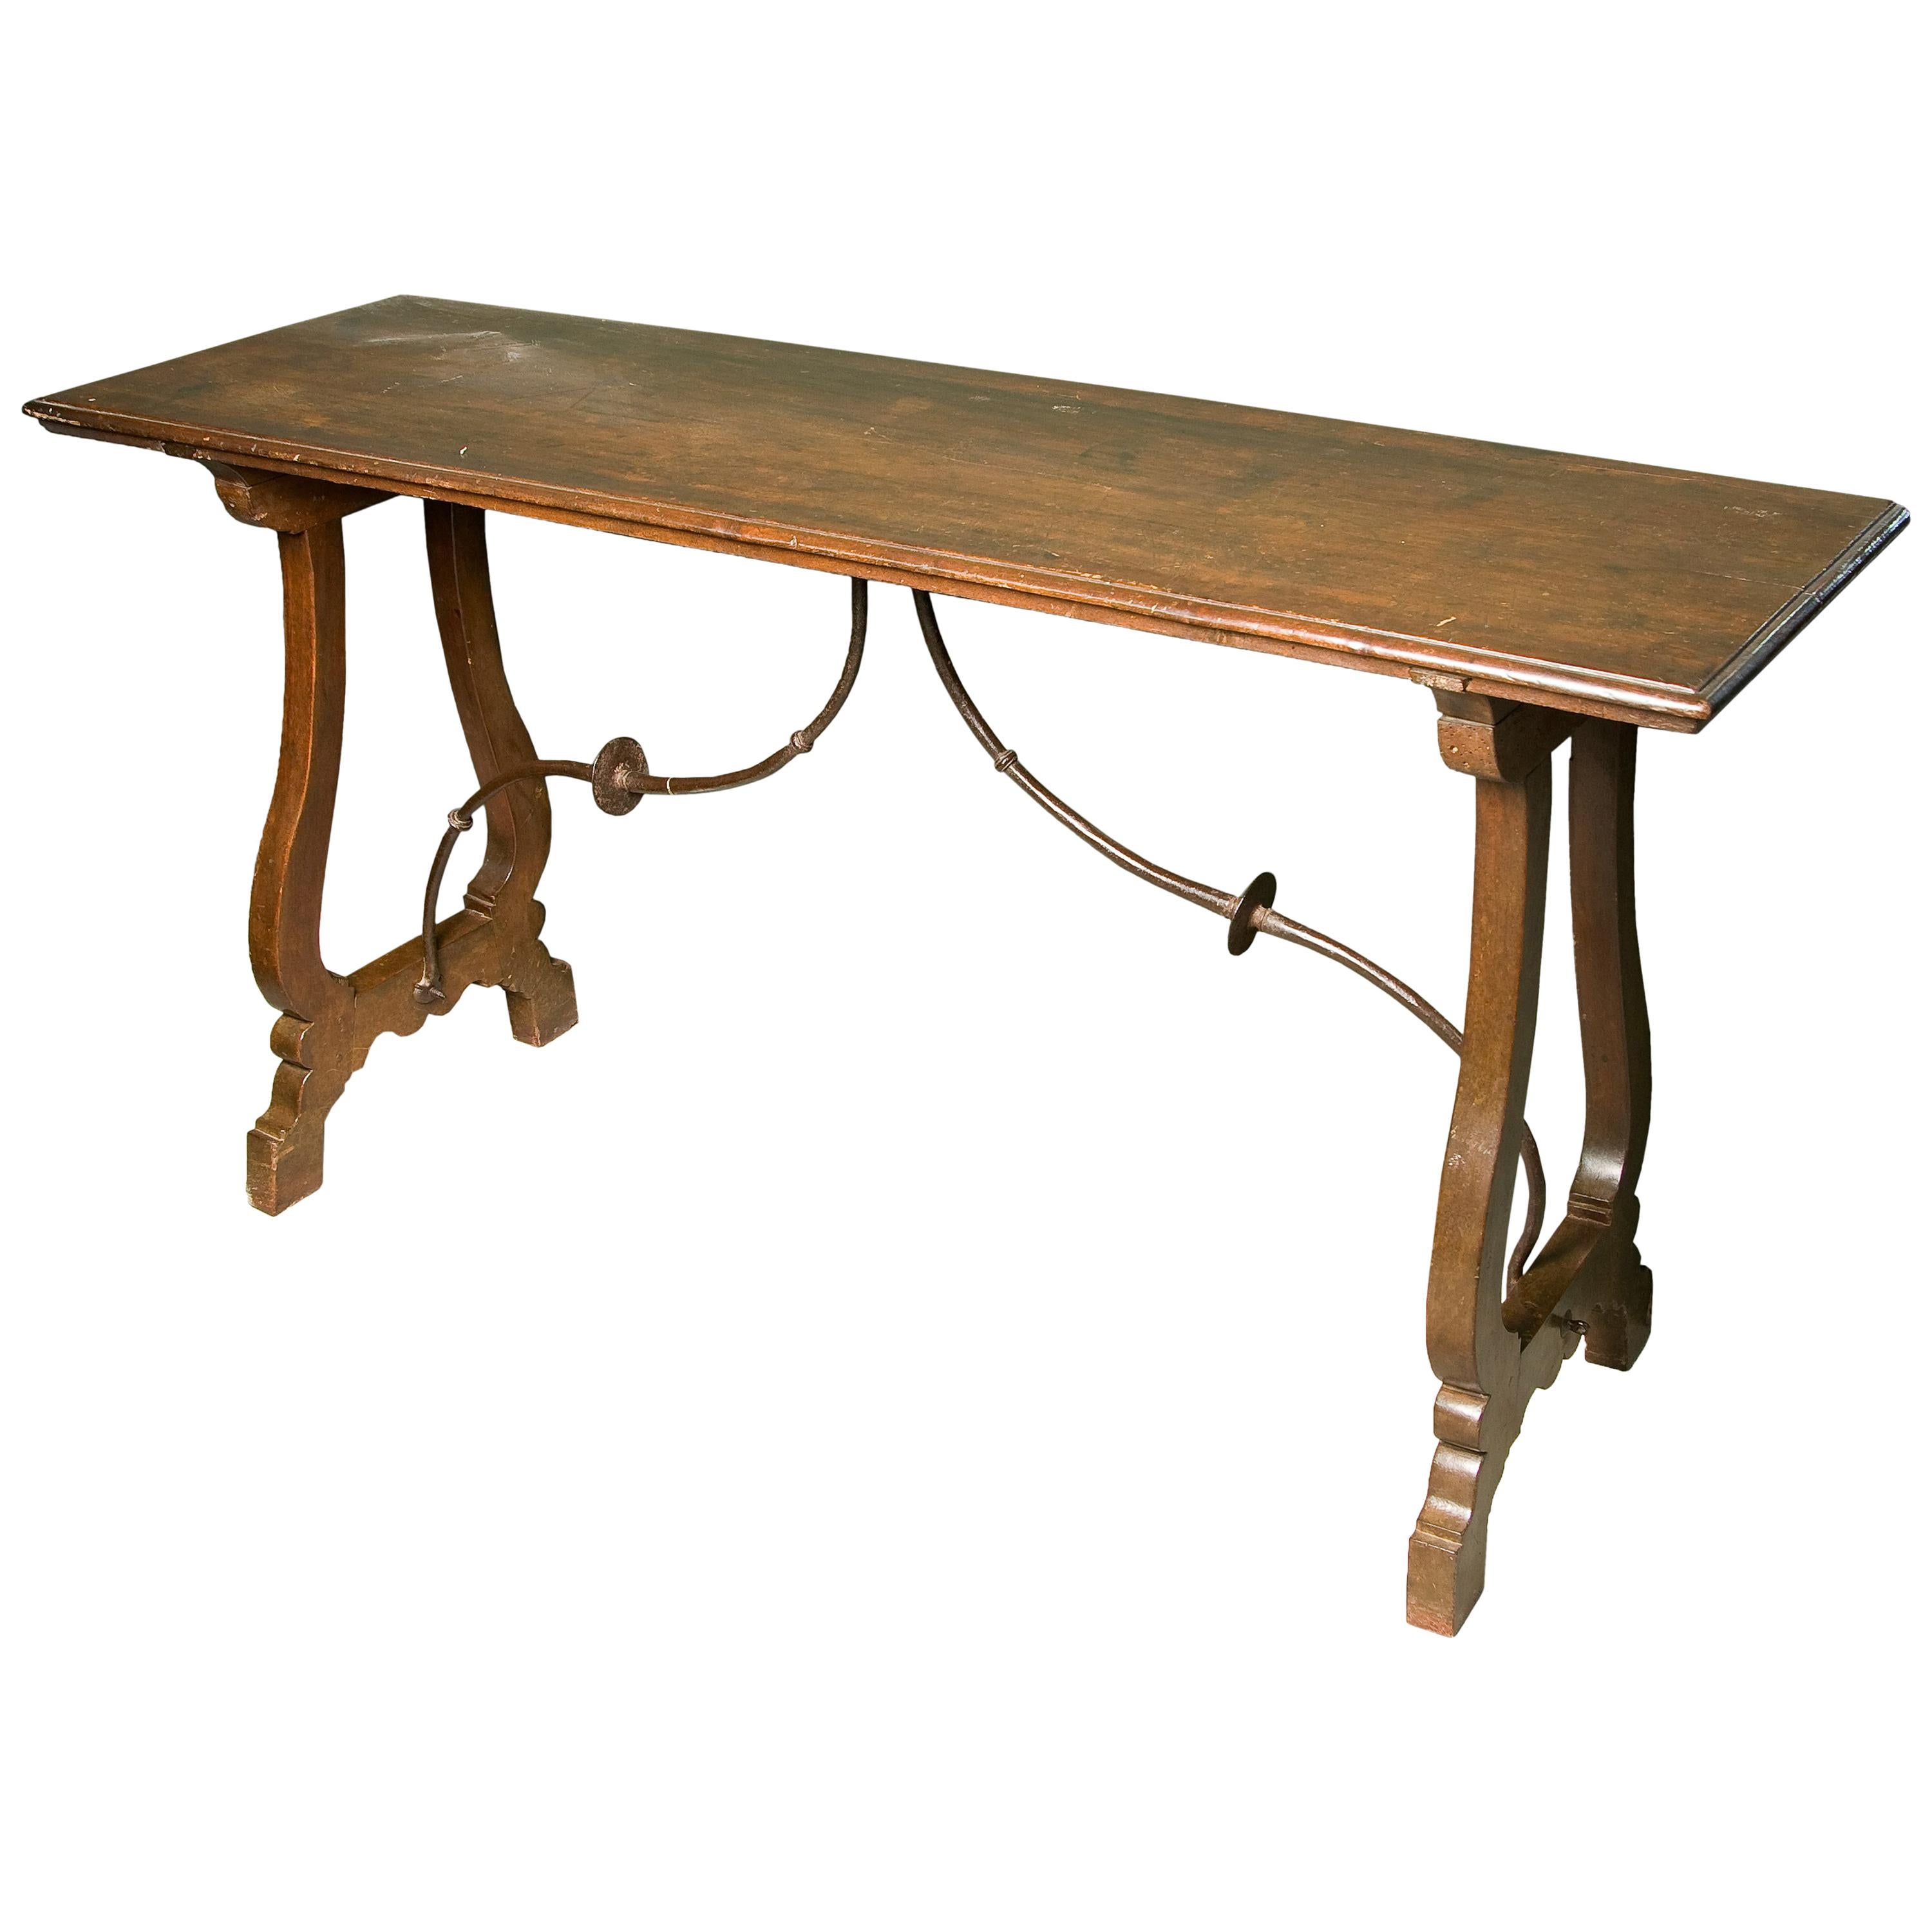 Walnut Table 'for "Bargueño" or Spanish Desk' with Wrought Iron Fittings